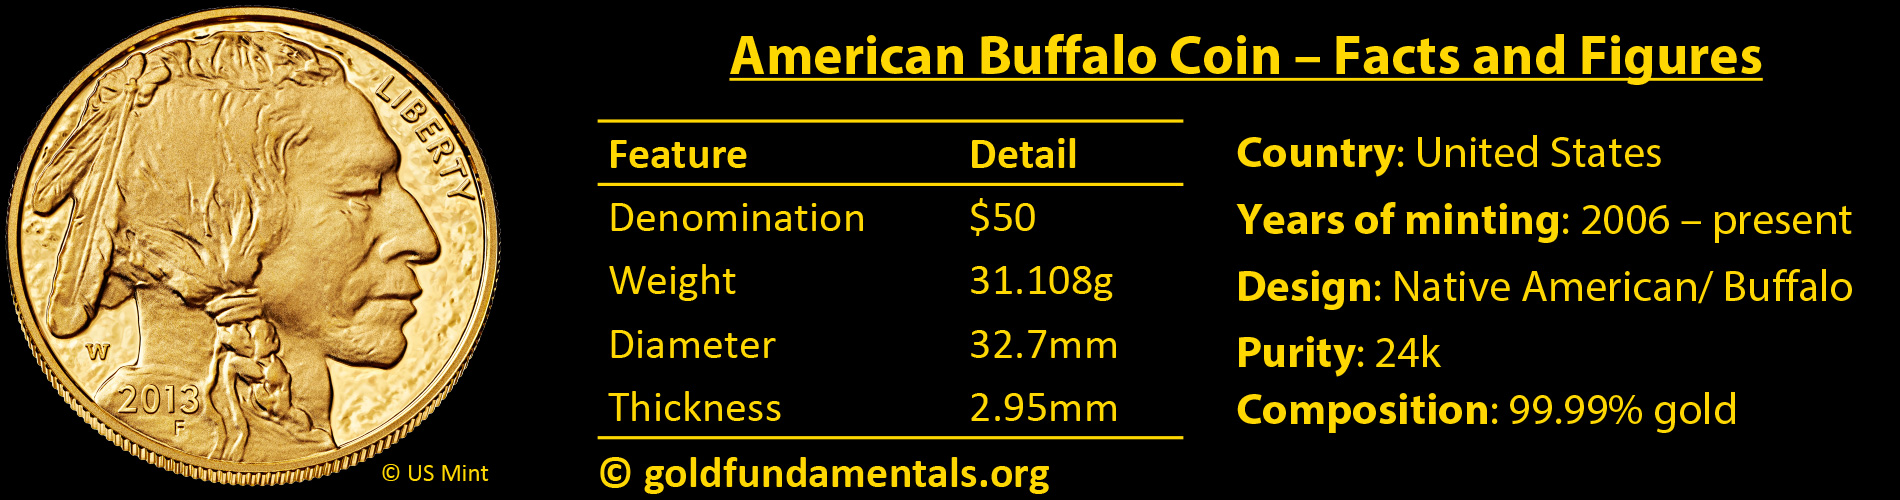 American Buffalo Gold Coin - Facts and Figures.